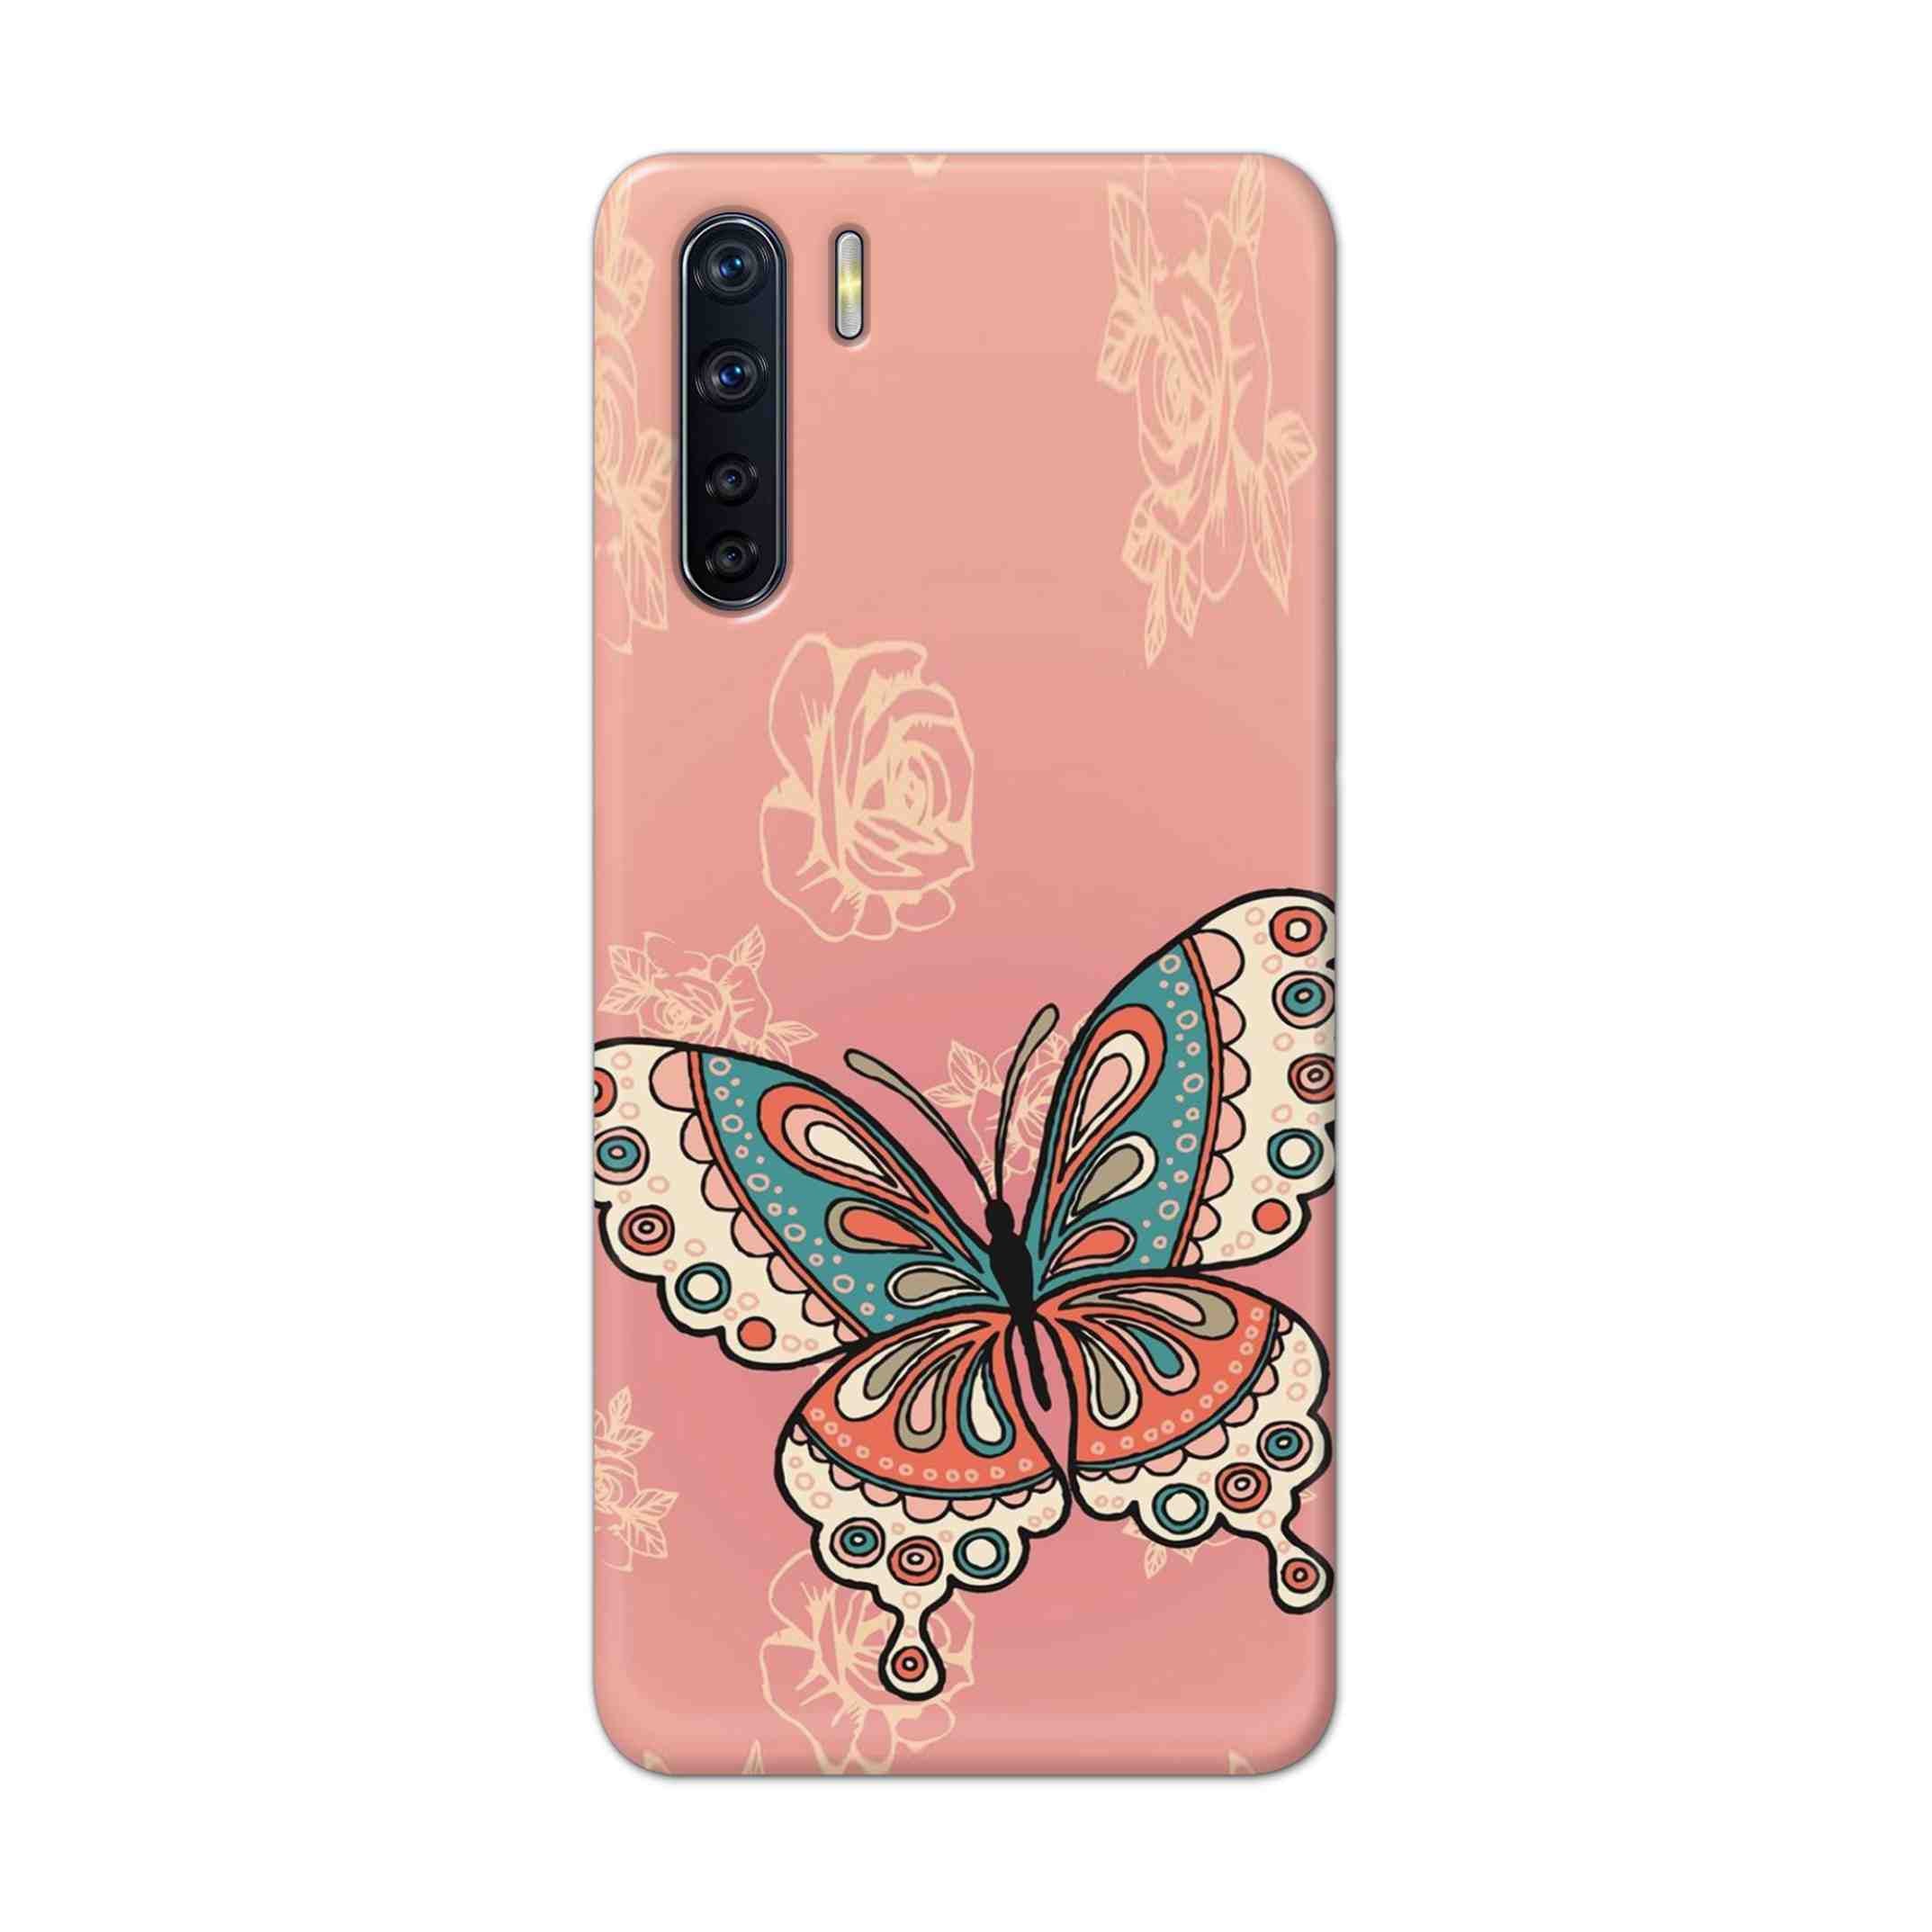 Buy Butterfly Hard Back Mobile Phone Case Cover For OPPO F15 Online